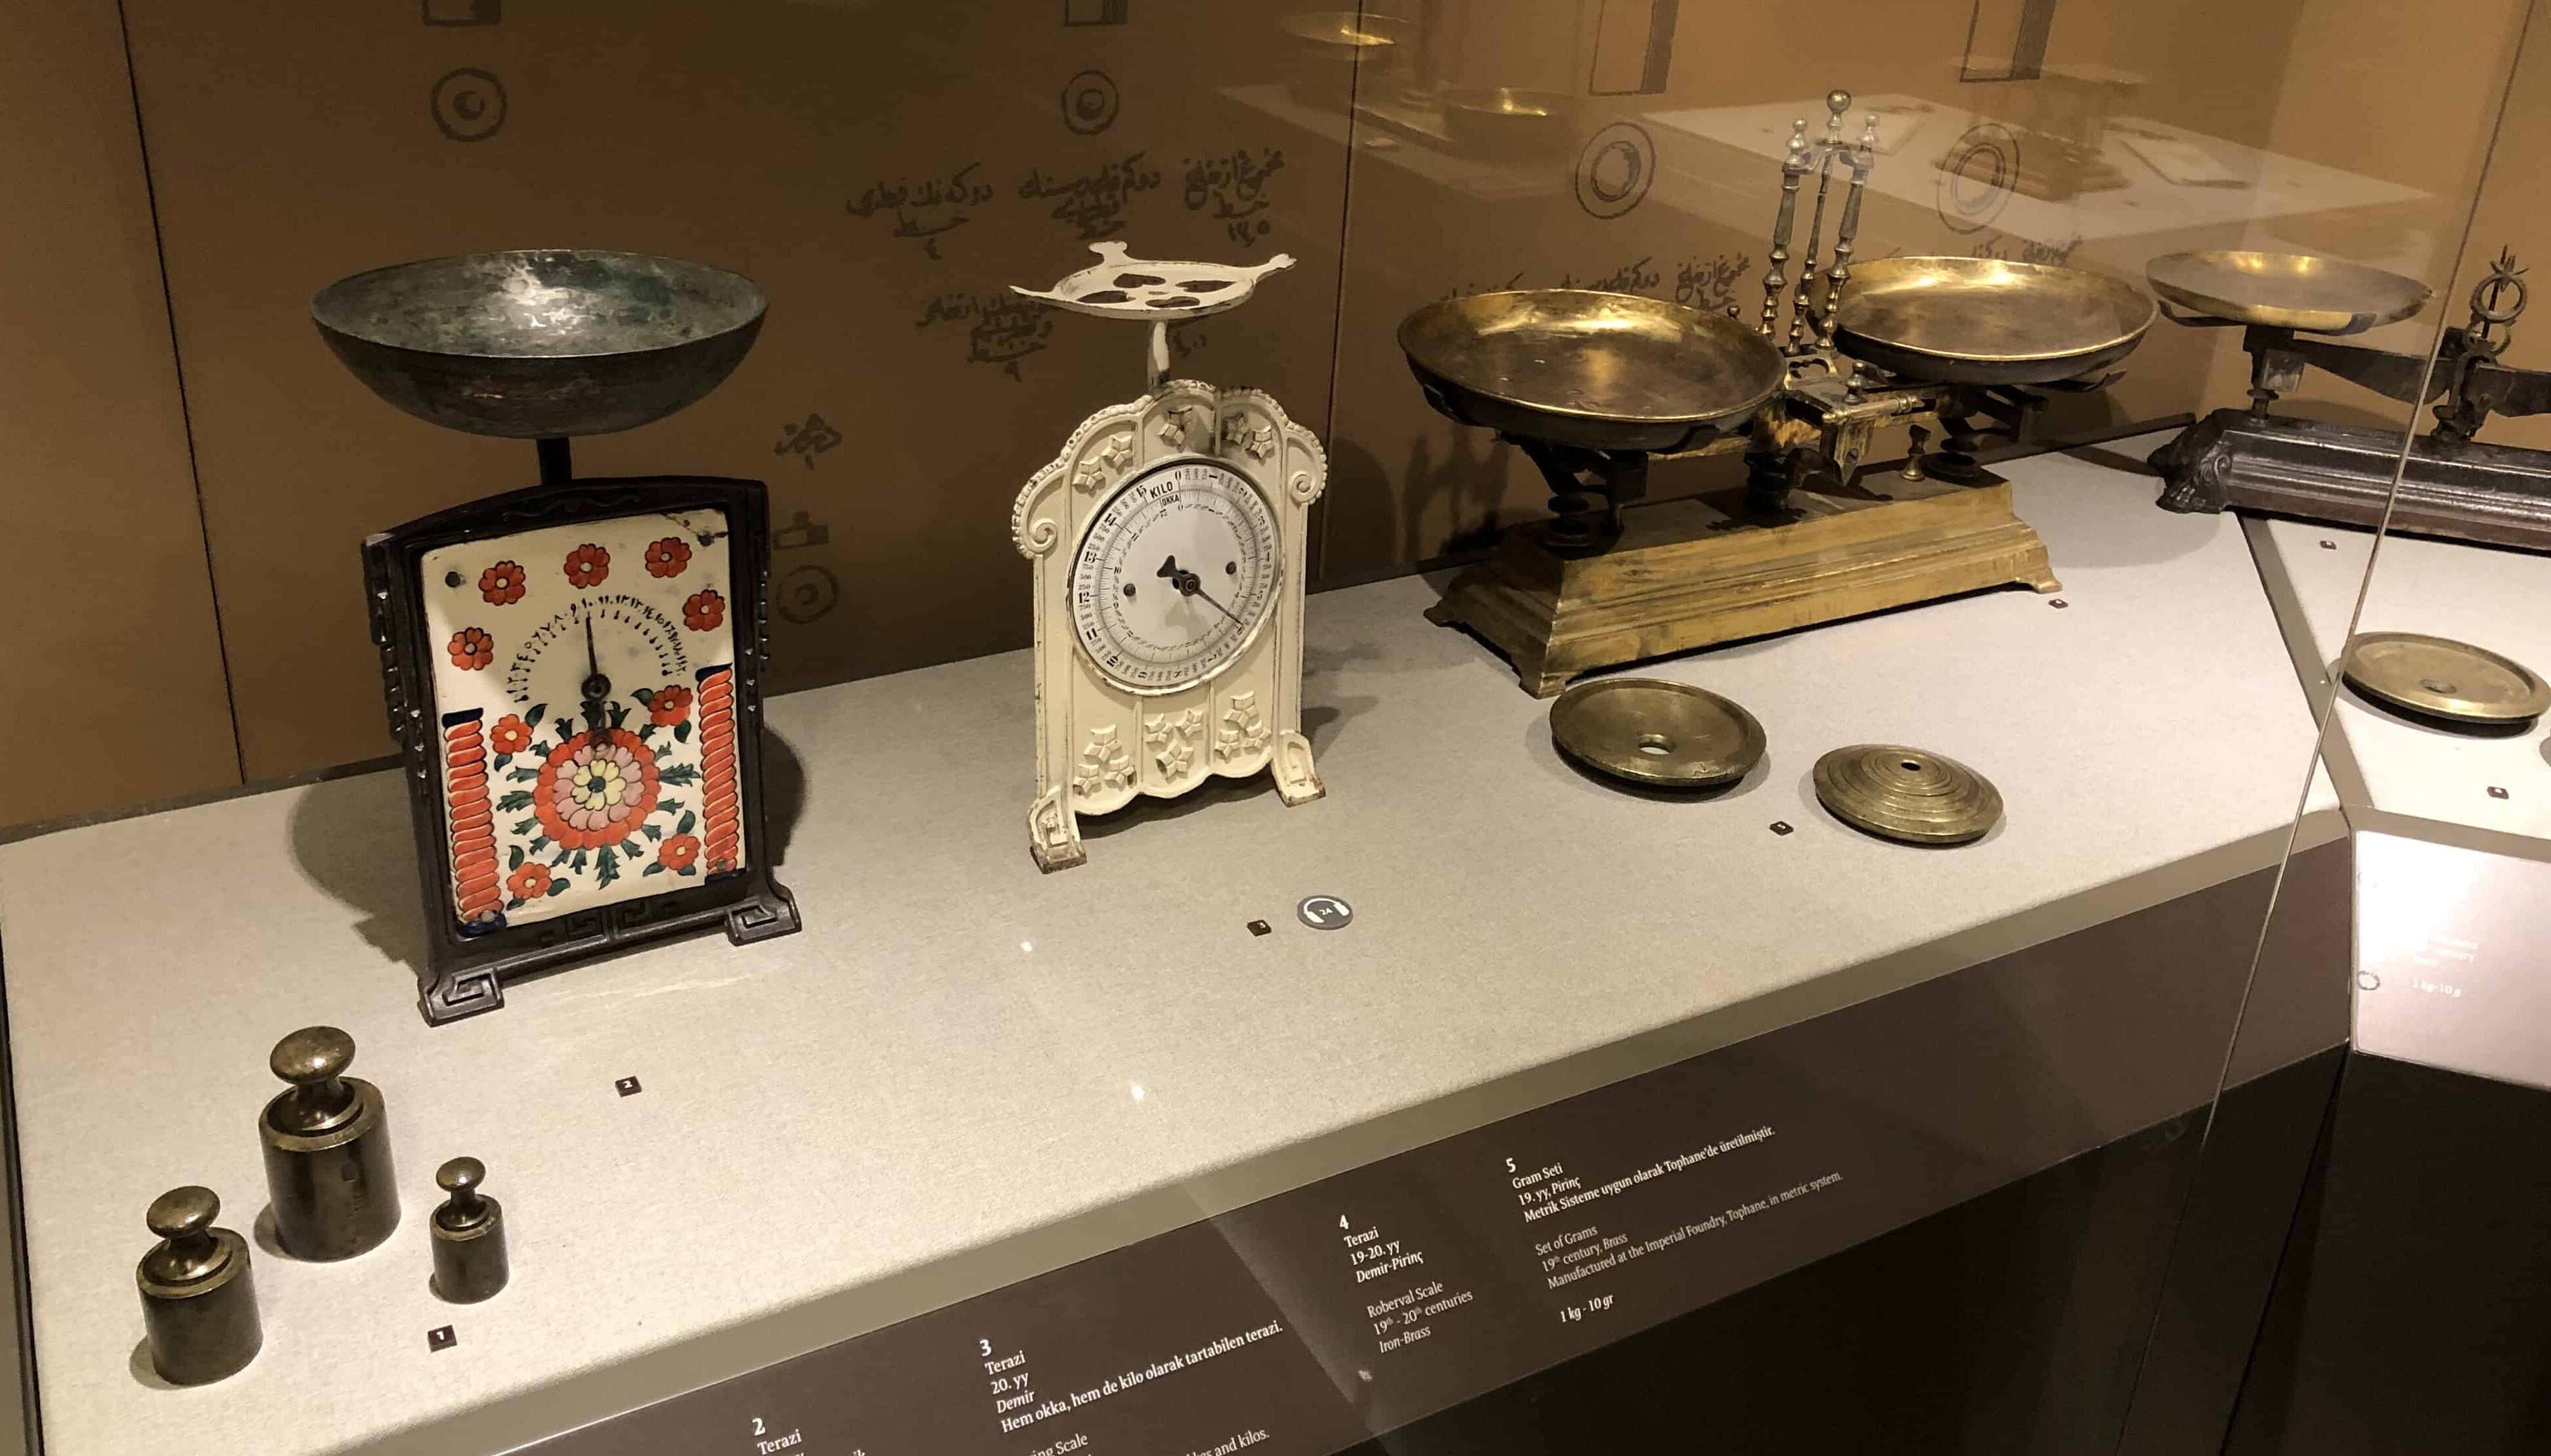 19th and 20th century Ottoman scales at the Pera Museum